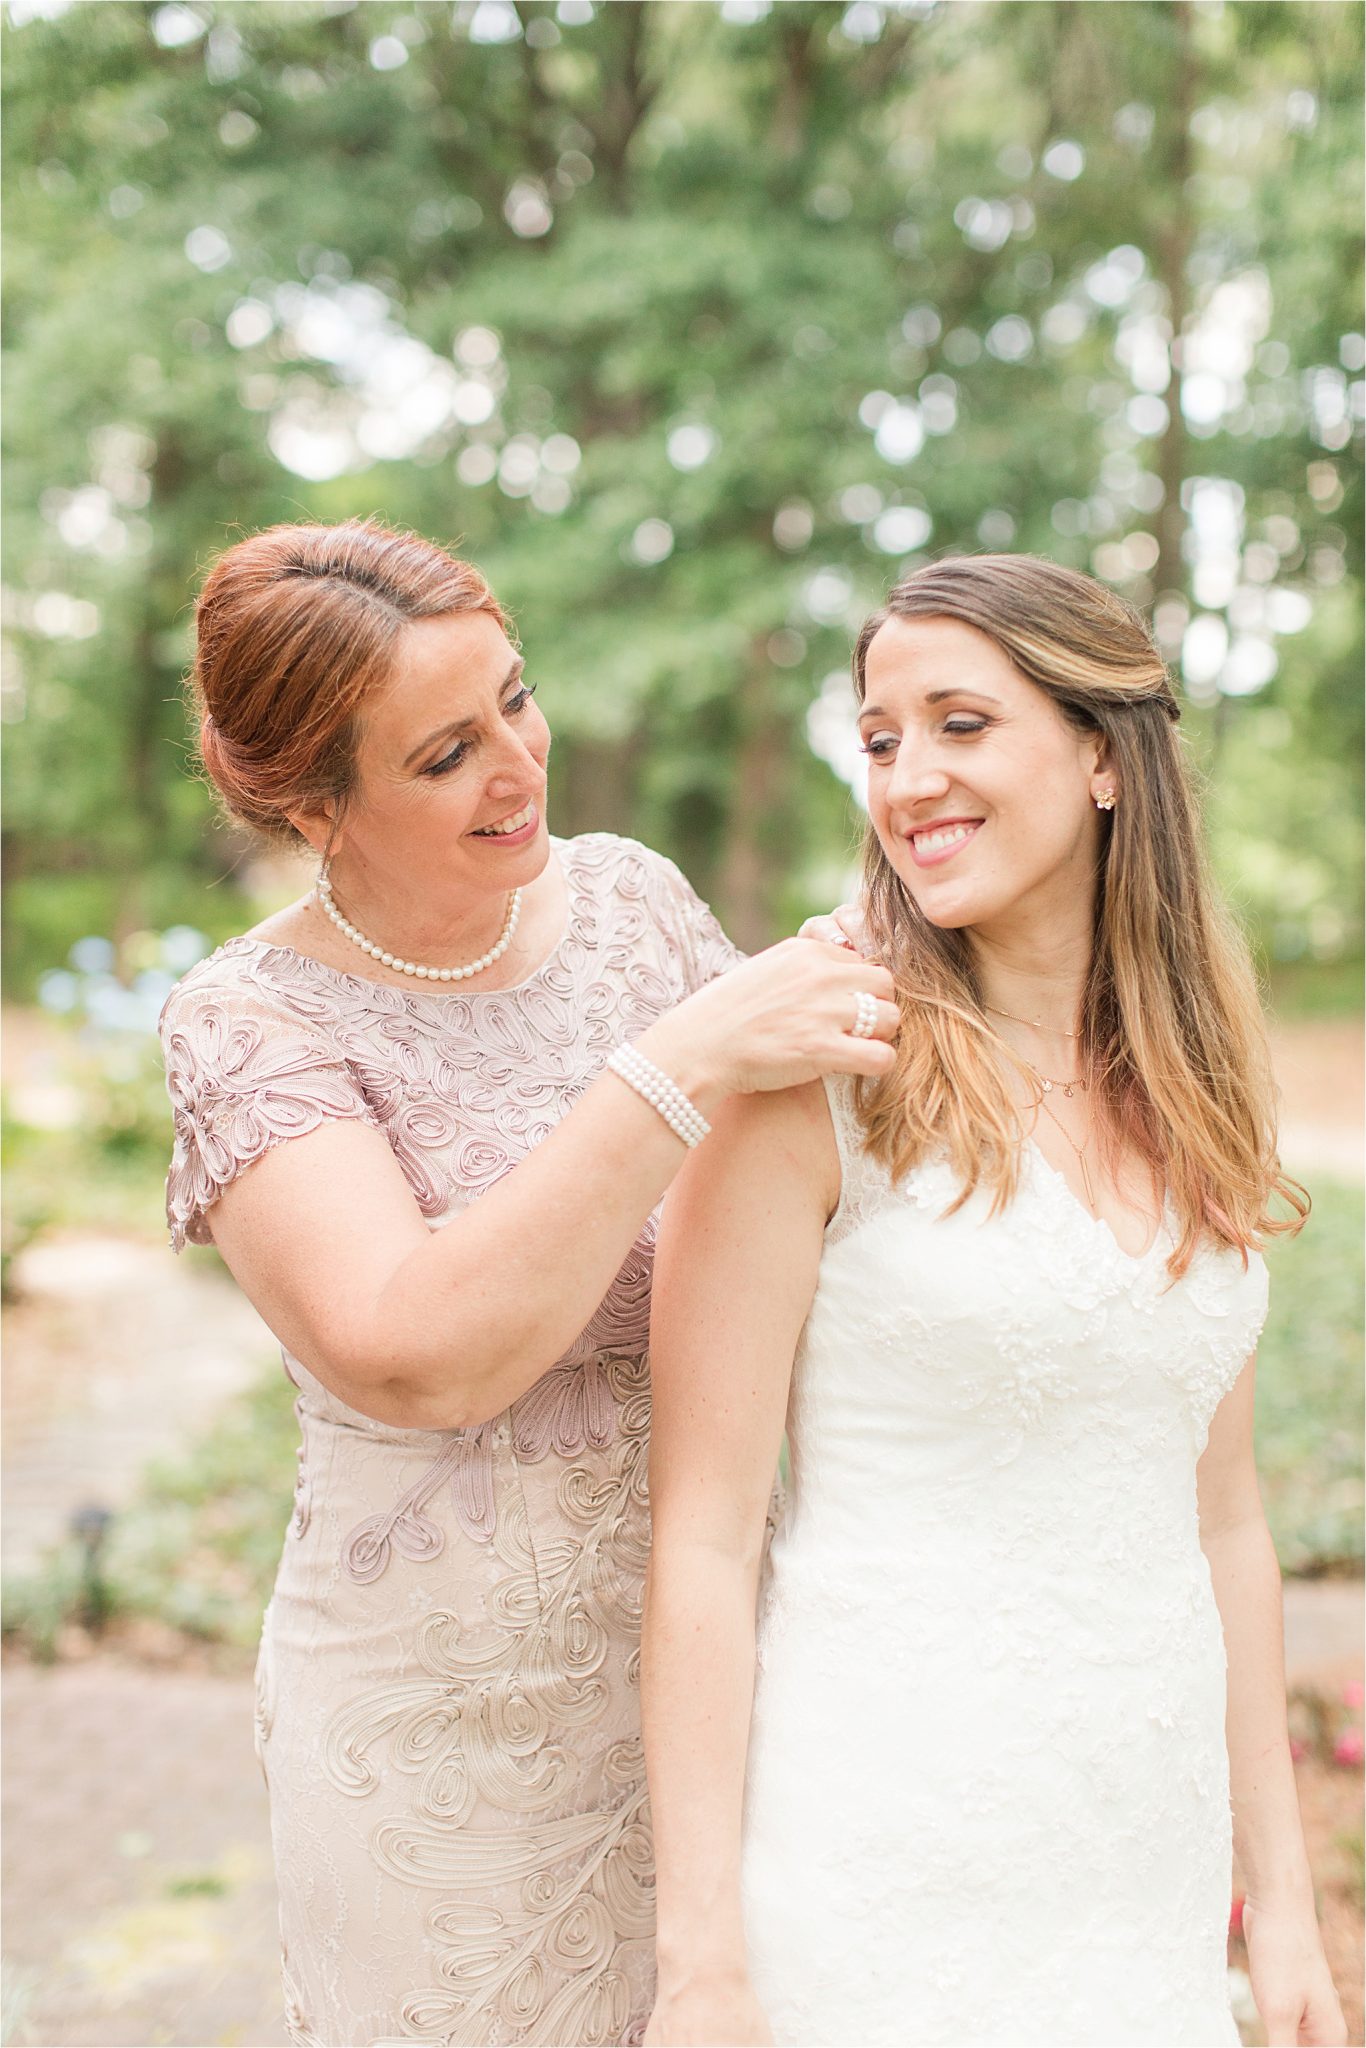 mother daughter getting ready-bride-wedding day-mother of the bride-dress-blushes and pearls